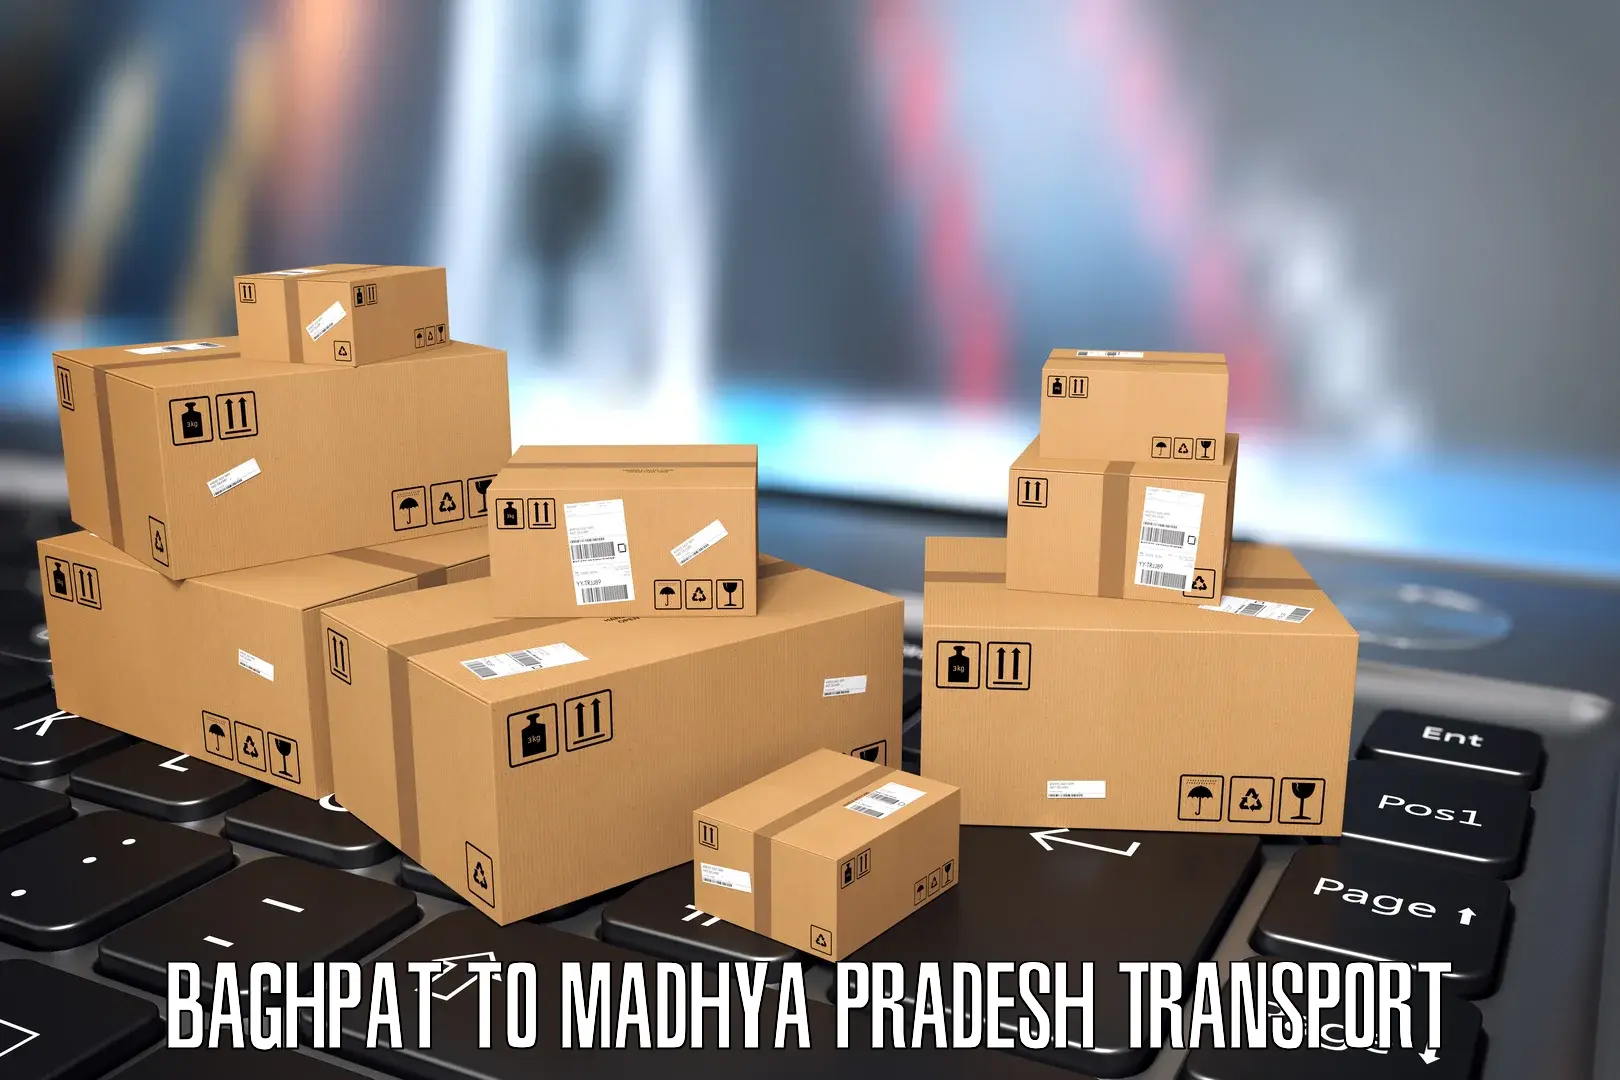 Container transport service Baghpat to Dola